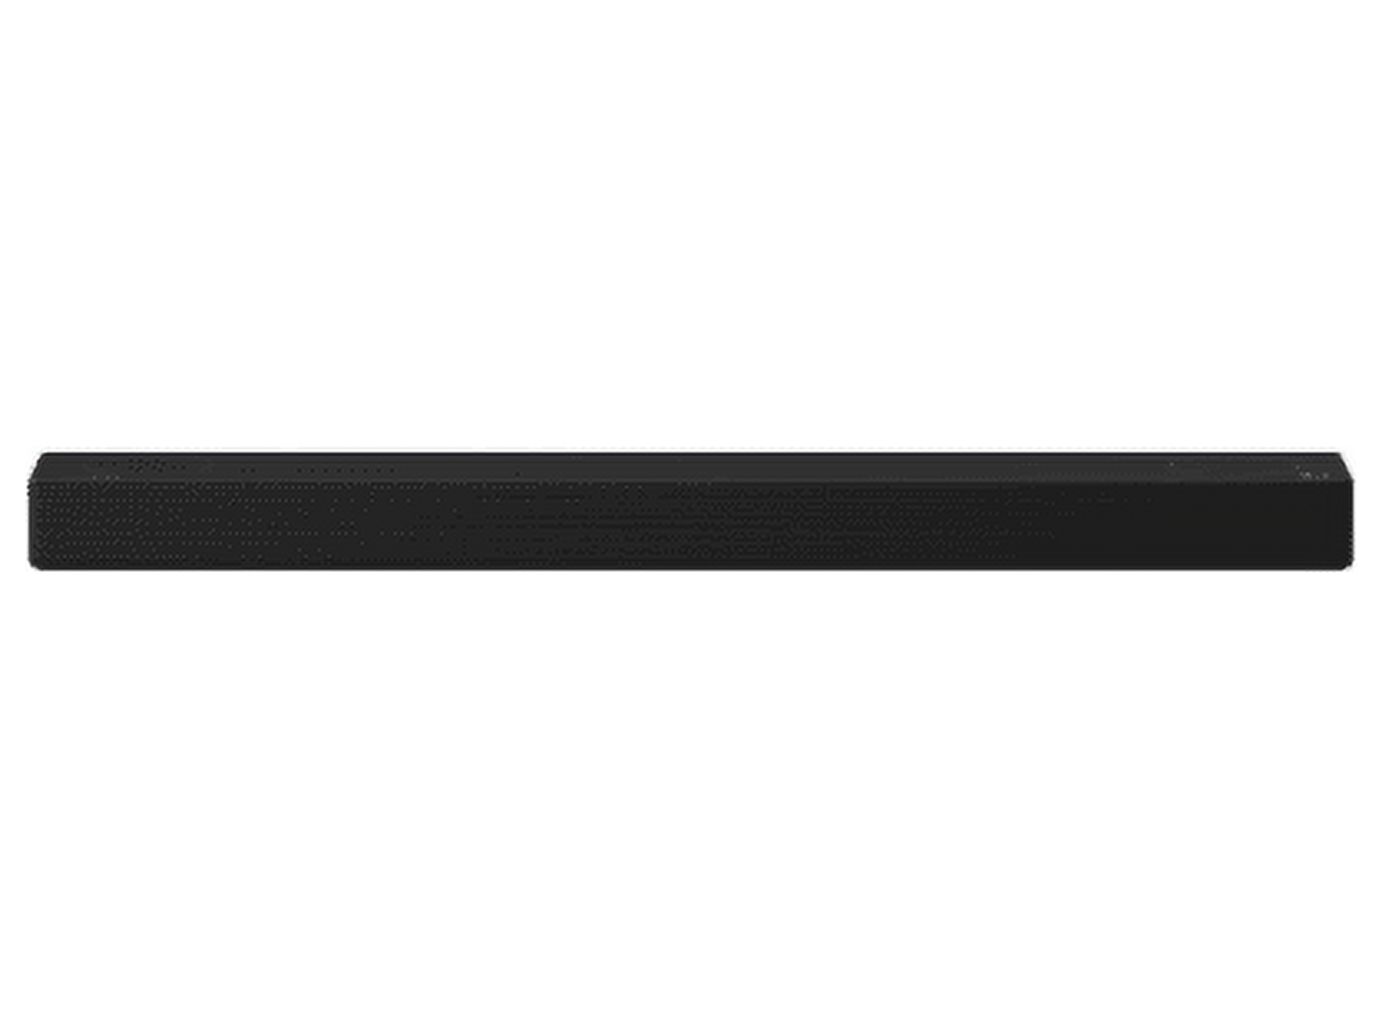 Restored Lg SPD7Y 3.1.2 Channel HighResolution Audio Sound Bar with Dolby Atmos (Refurbished) - image 2 of 3